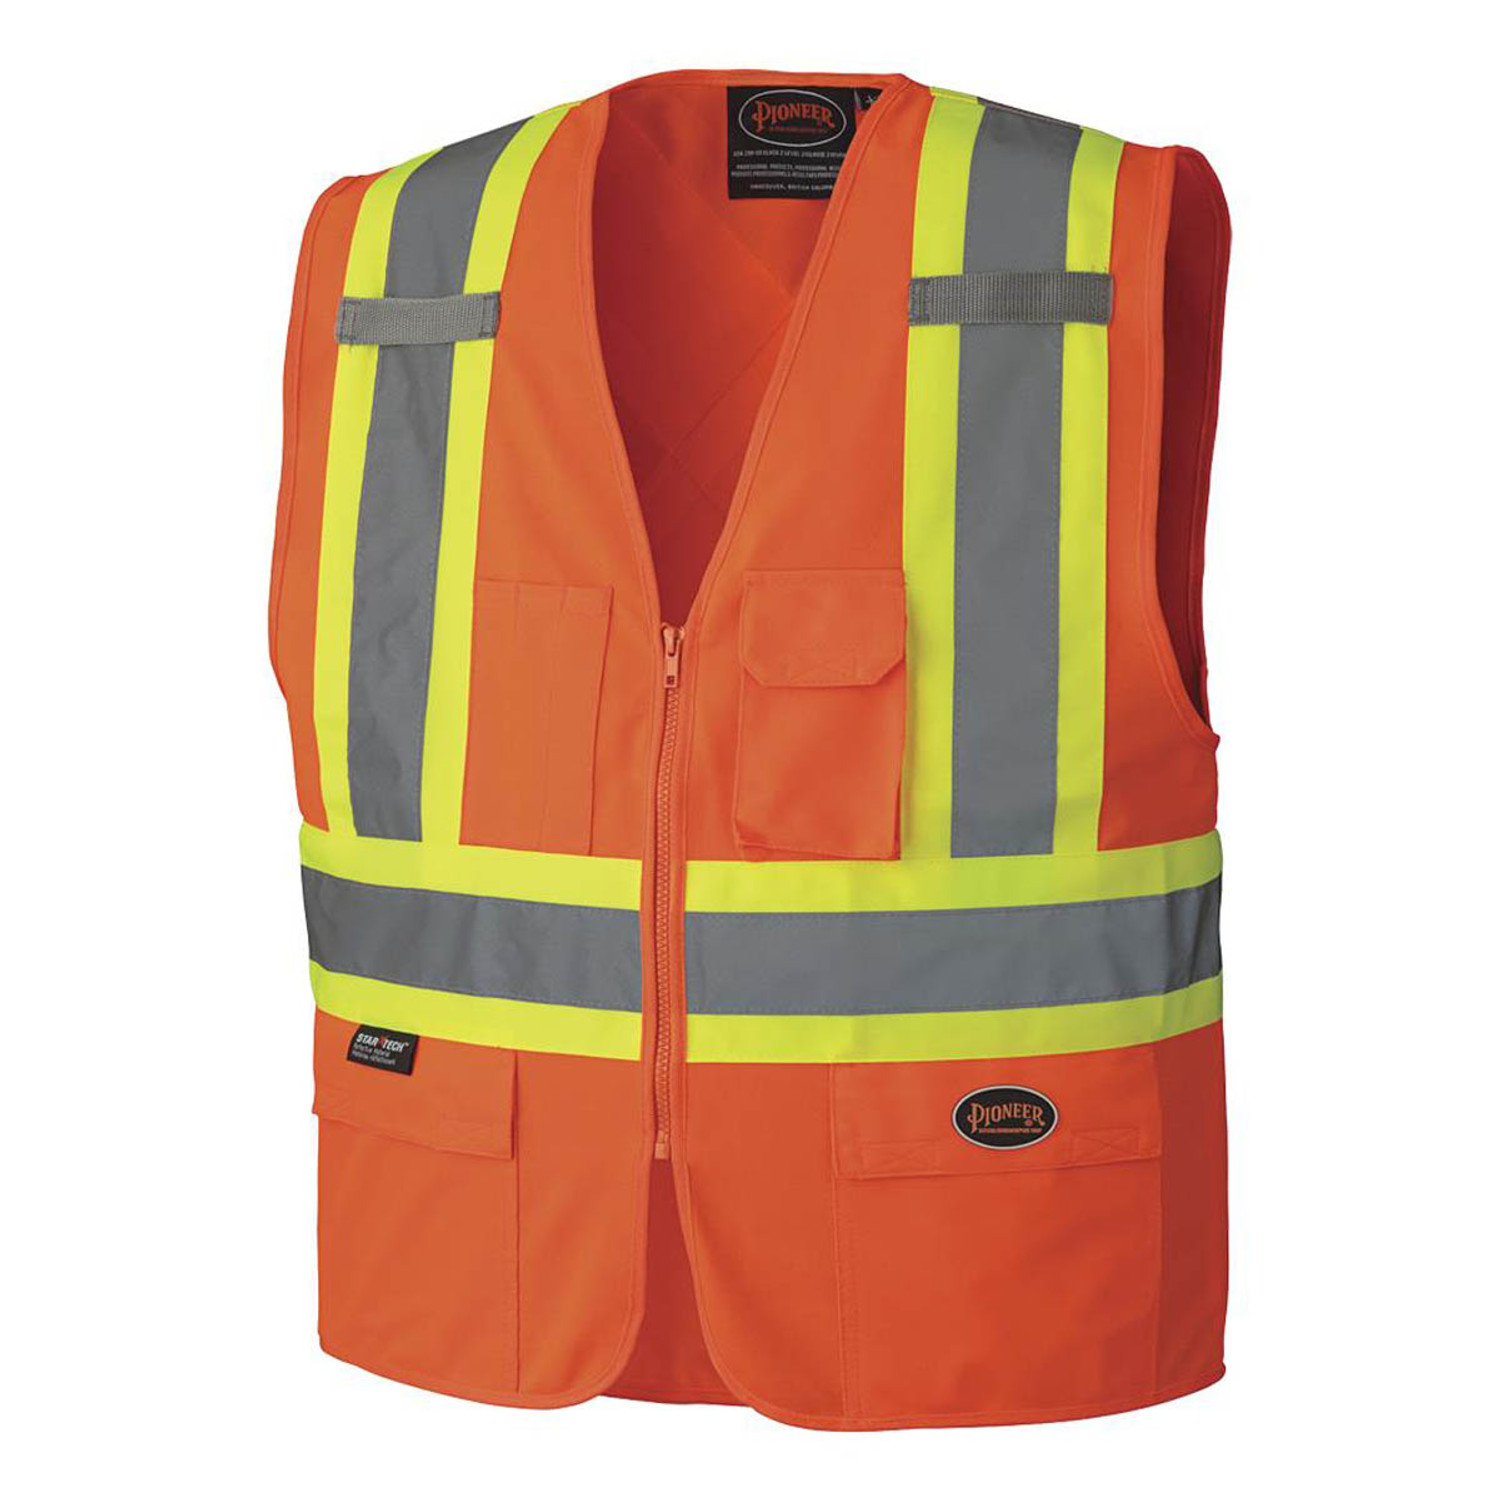 https://cdn11.bigcommerce.com/s-10f42/images/stencil/1500x1500/products/543/9797/pioneer-safety-vest-safetywear.ca-hi-vis-orange__40655.1702995753.jpg?c=2?imbypass=on